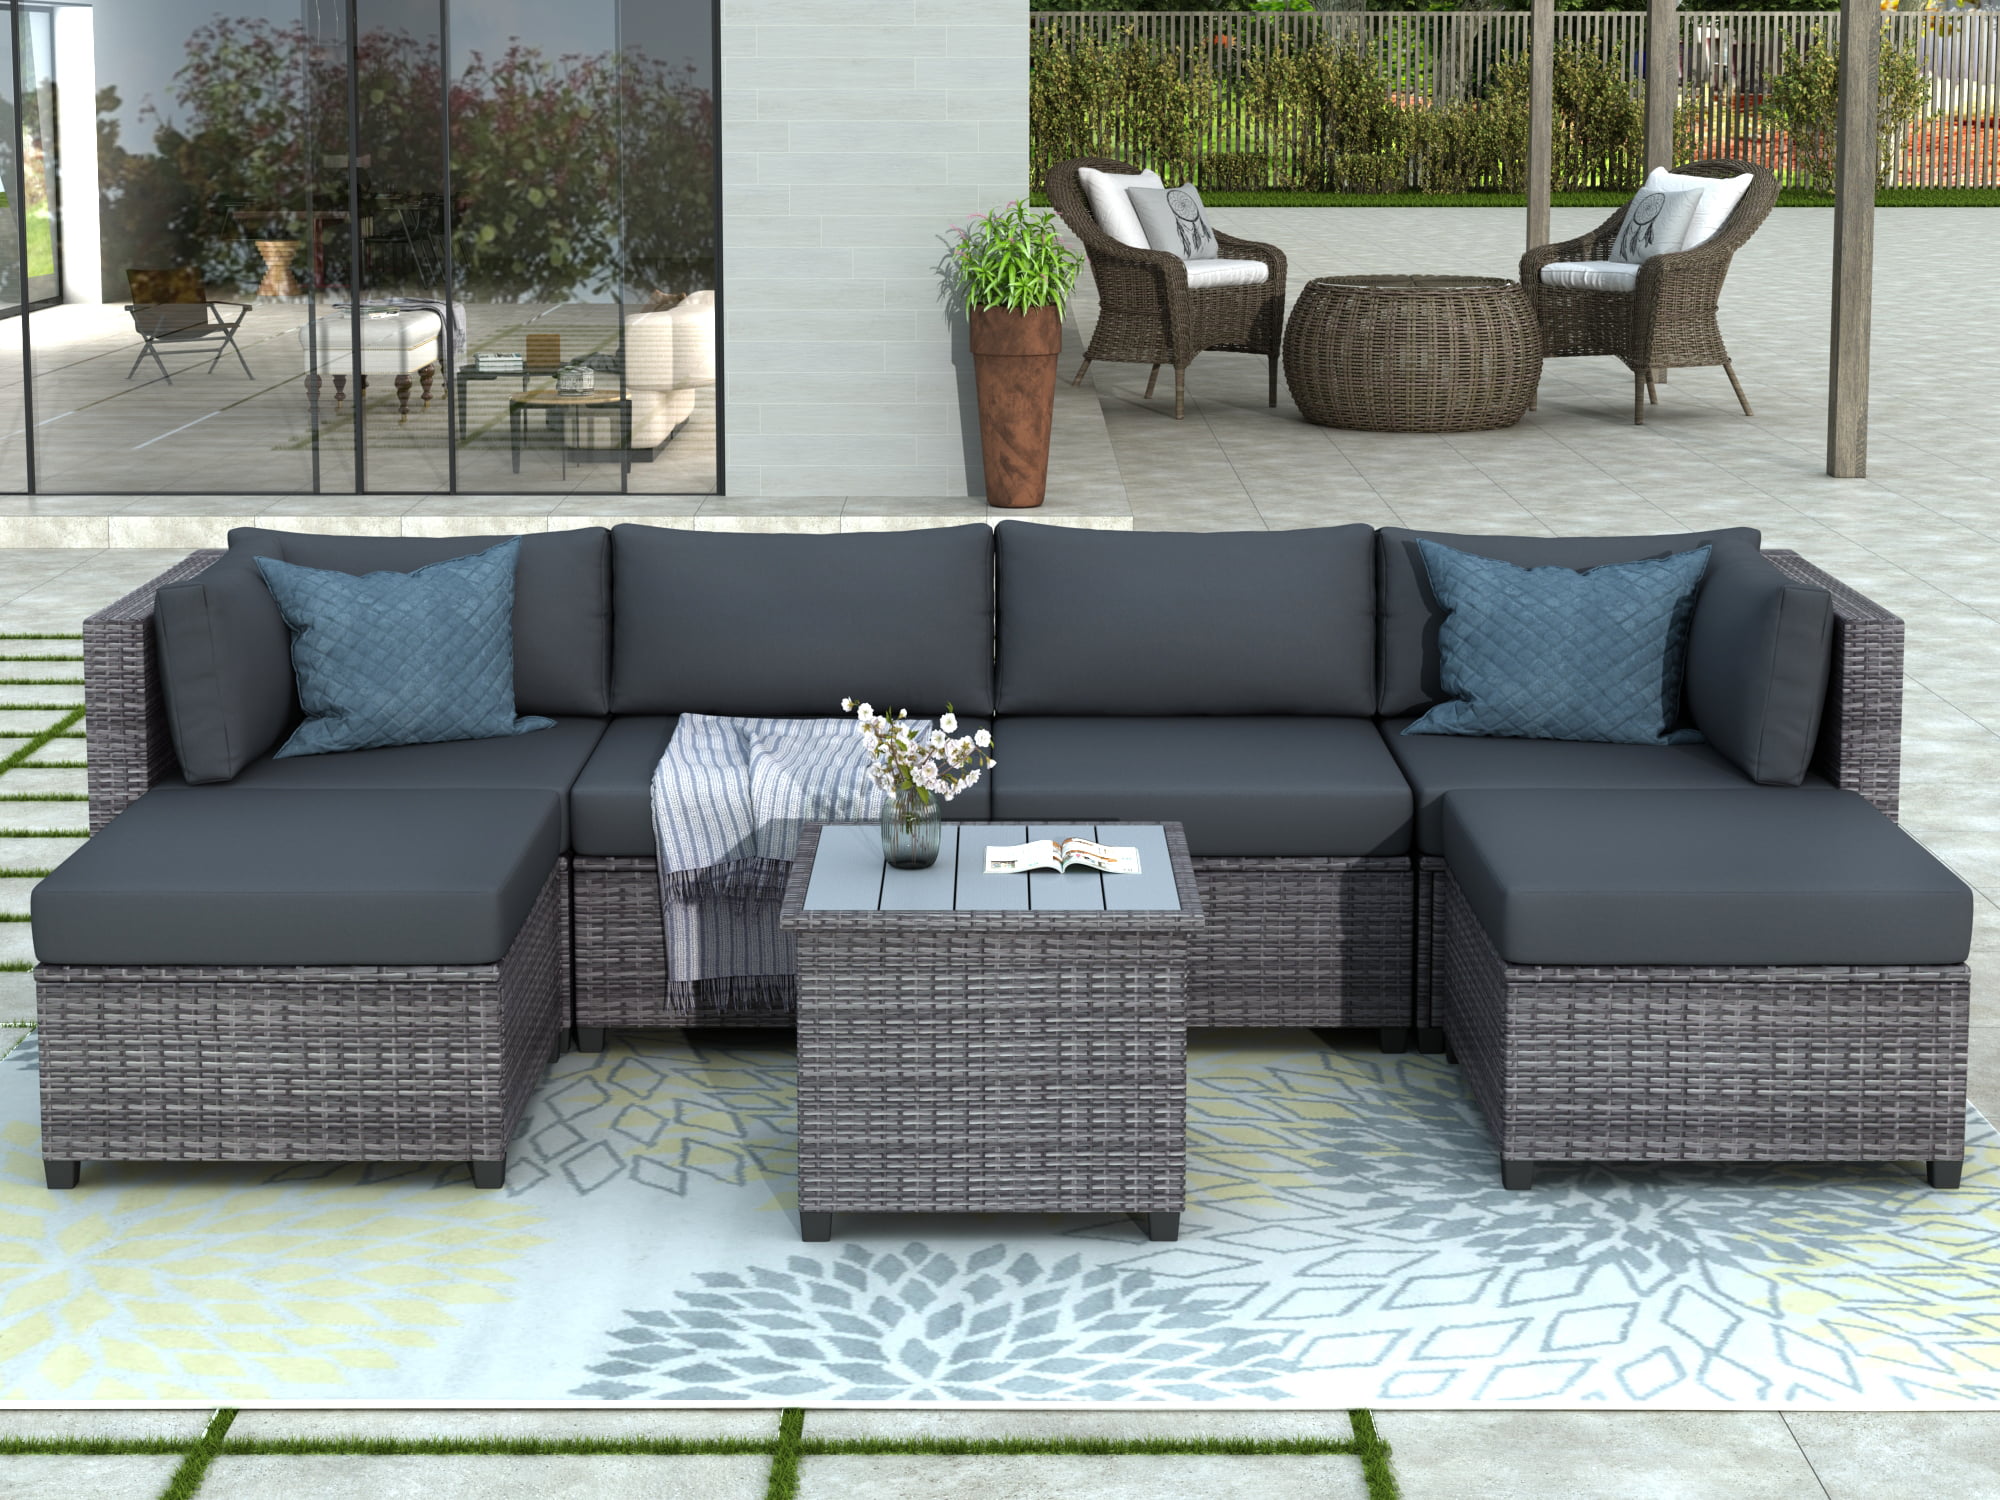 Outdoor Patio Deck Sectional Sofa Sets, SEGMART Newest 7 Pieces Wicker